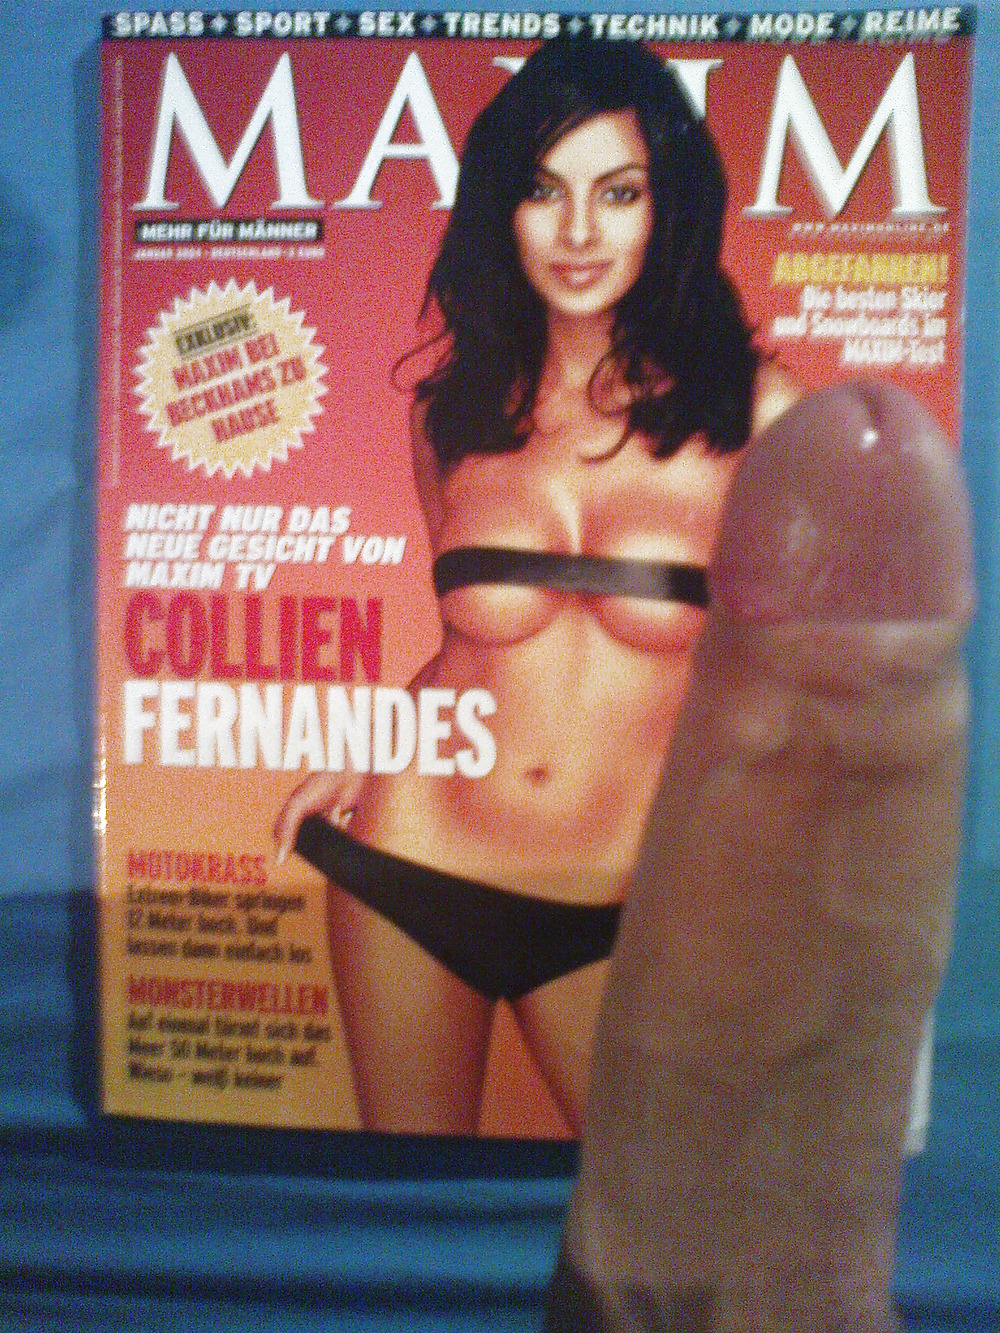 Collienne wants some more cum!!! #3420129